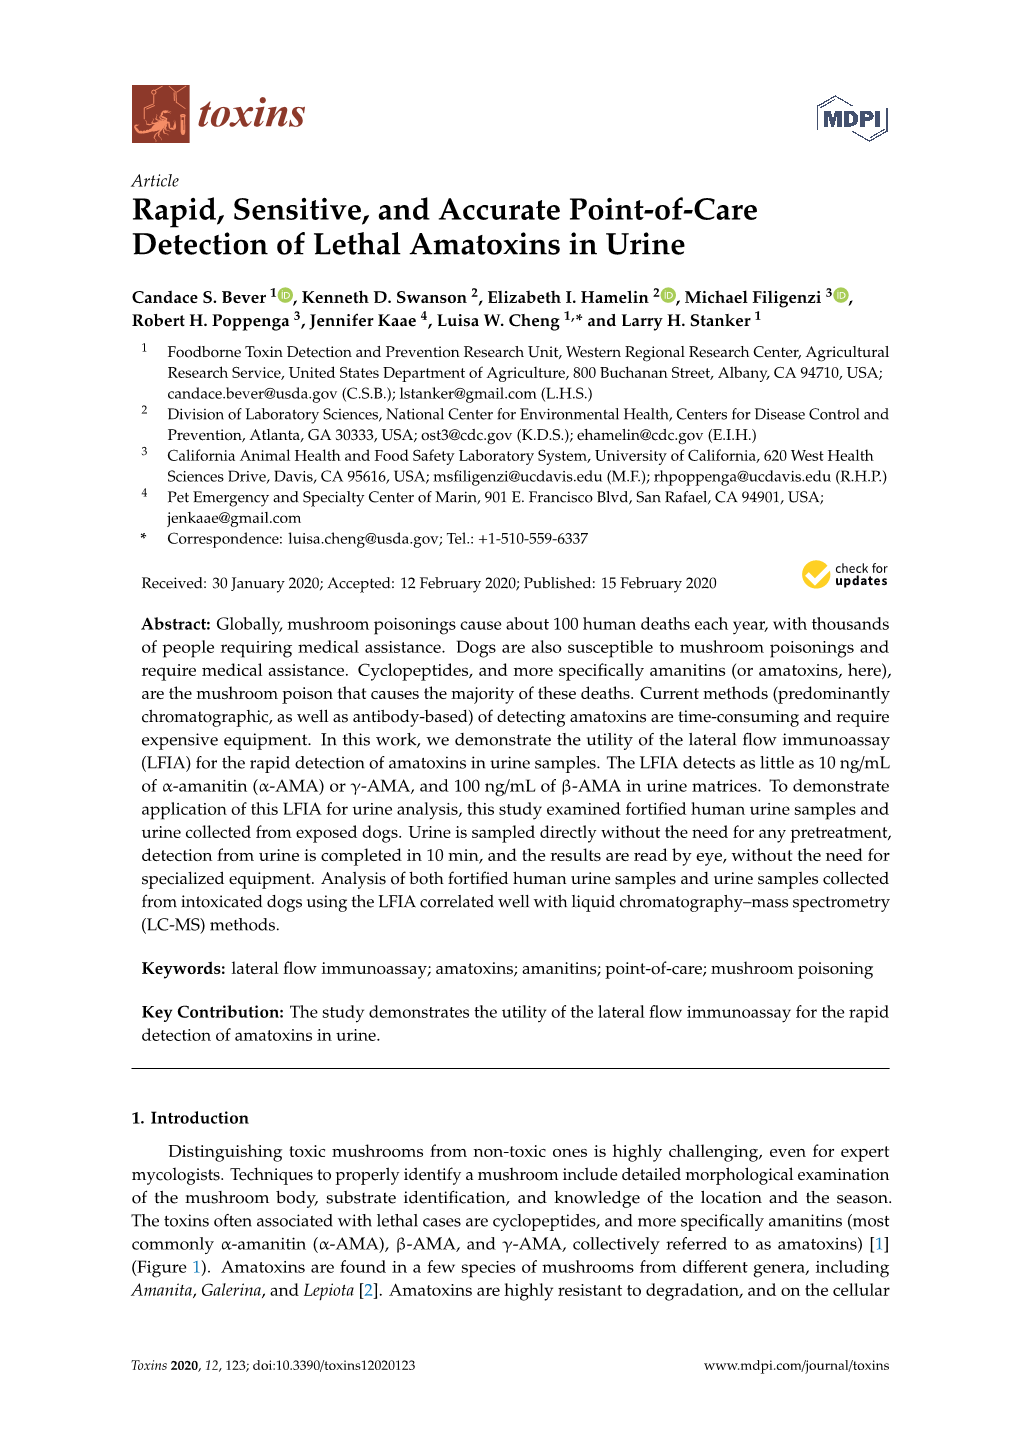 Rapid, Sensitive, and Accurate Point-Of-Care Detection of Lethal Amatoxins in Urine